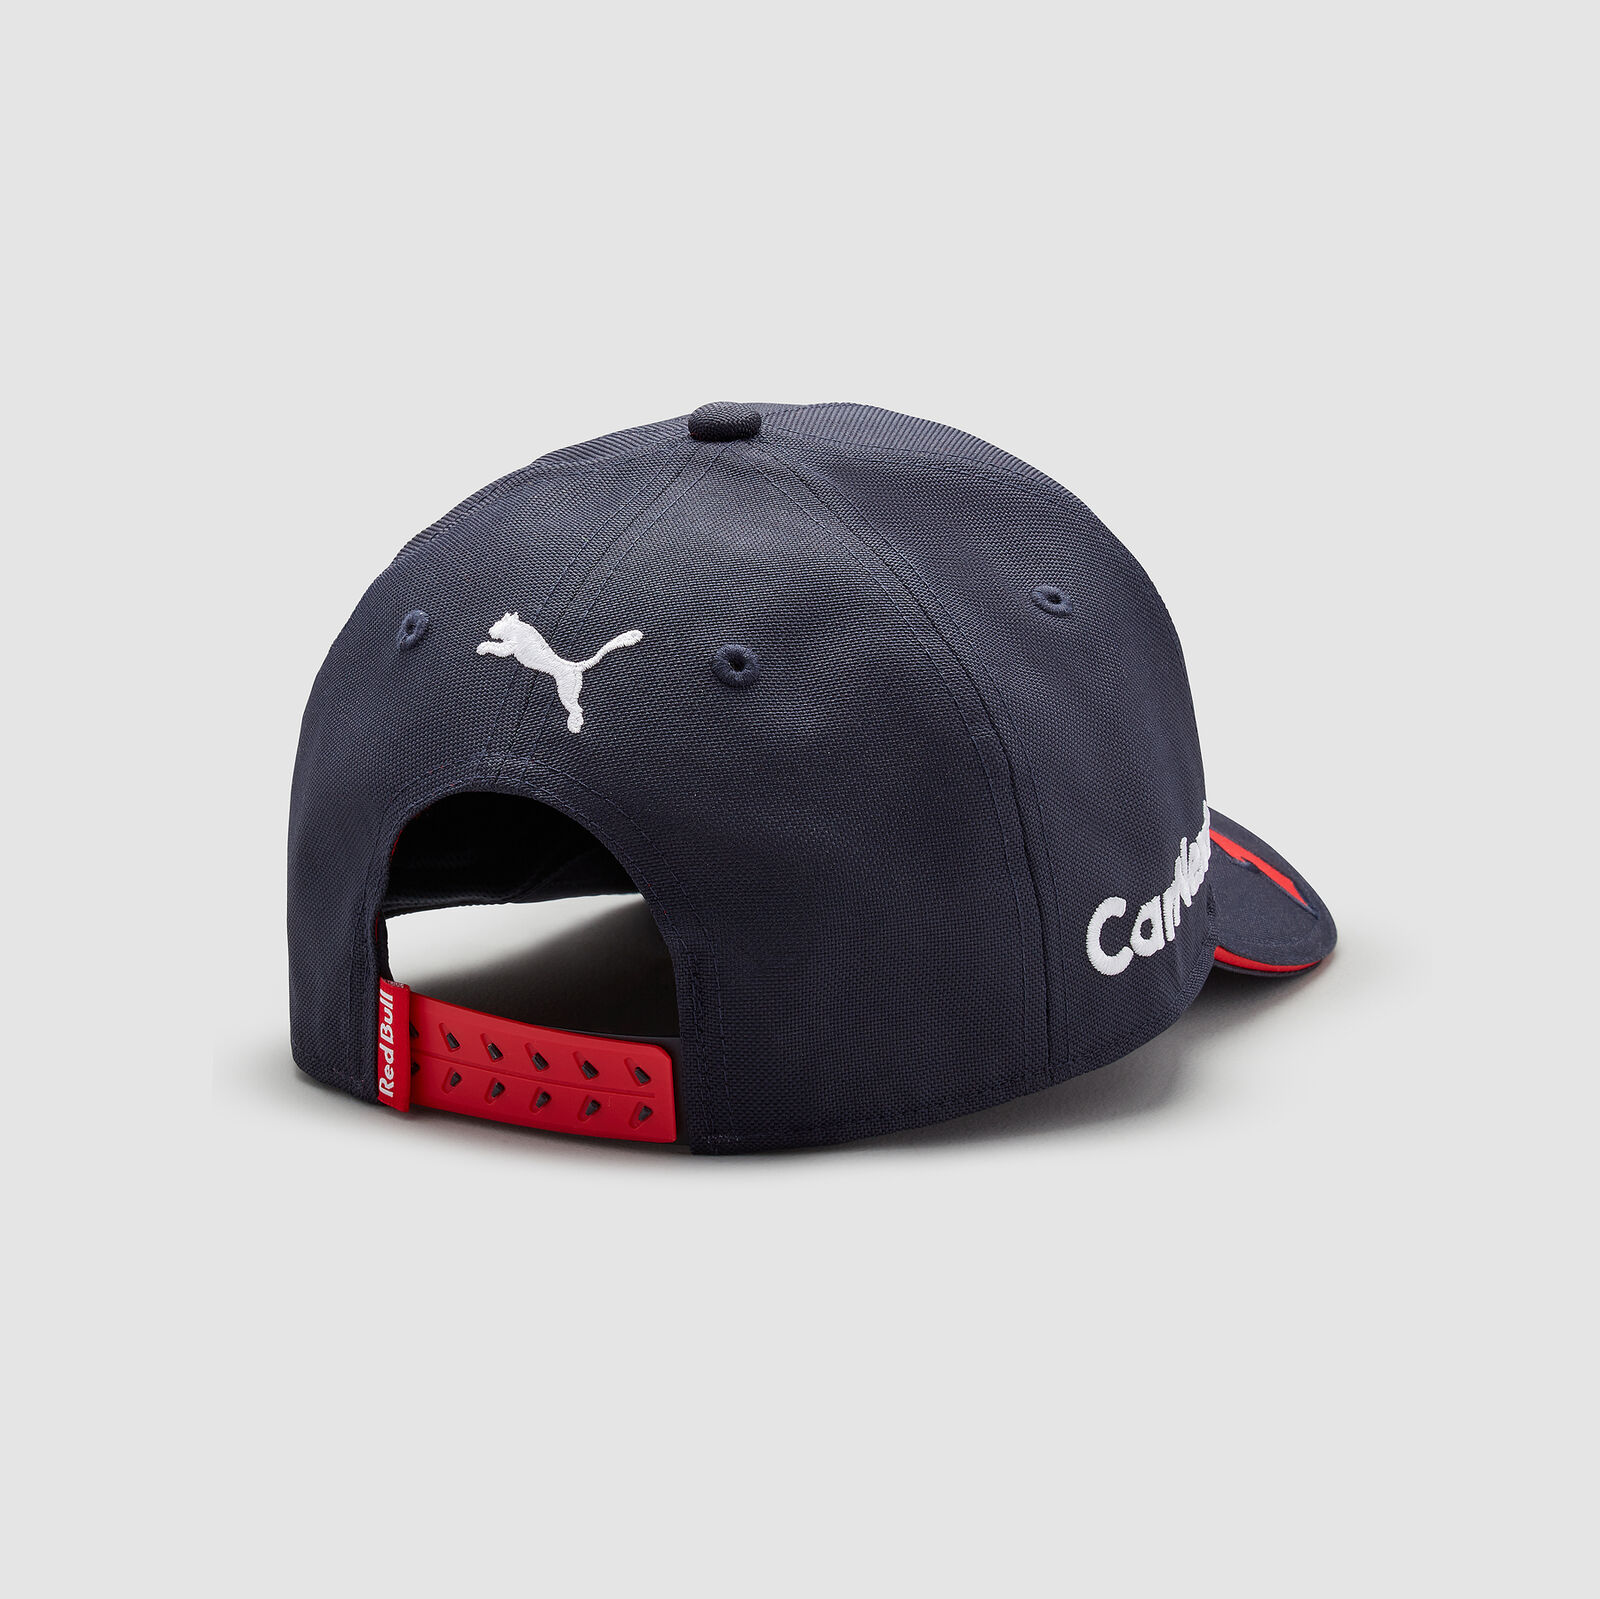 liter Airco Wafel Max Verstappen Kids 2022 Team Hat - Red Bull Racing | Fuel For Fans